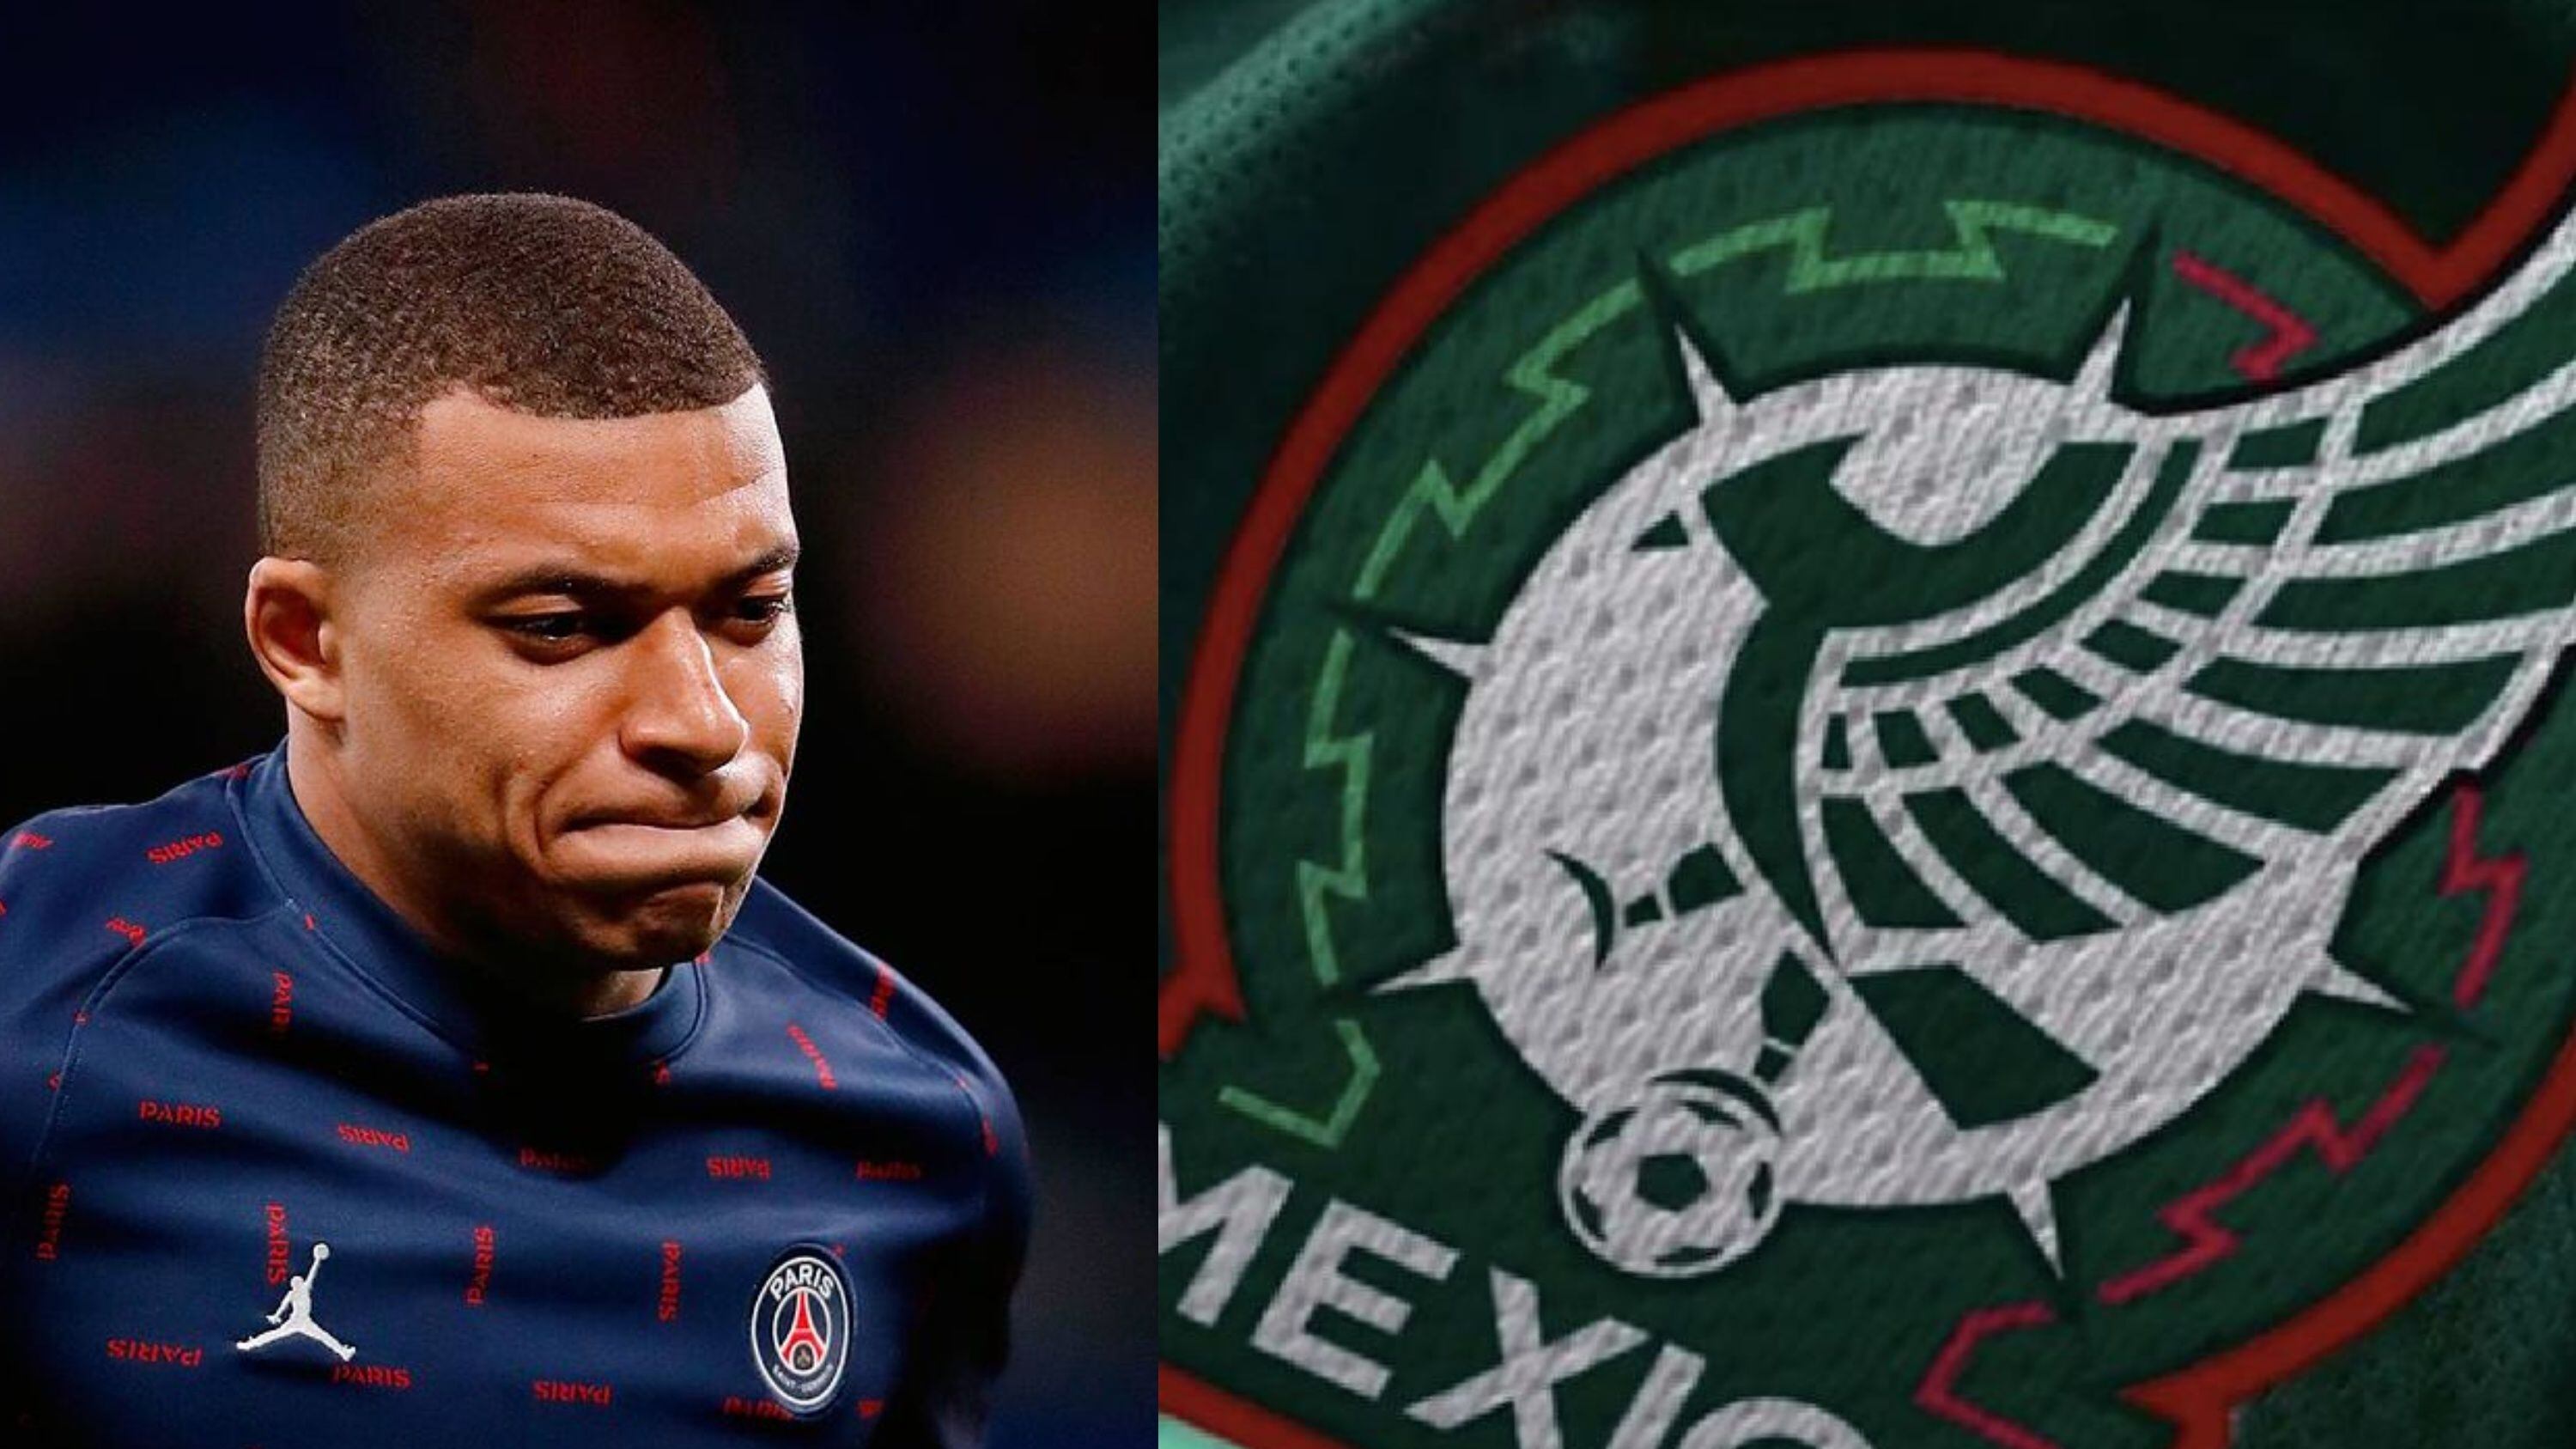 If Mbappe leaves PSG for Madrid, the Tri player who could replace him, is not Lozano